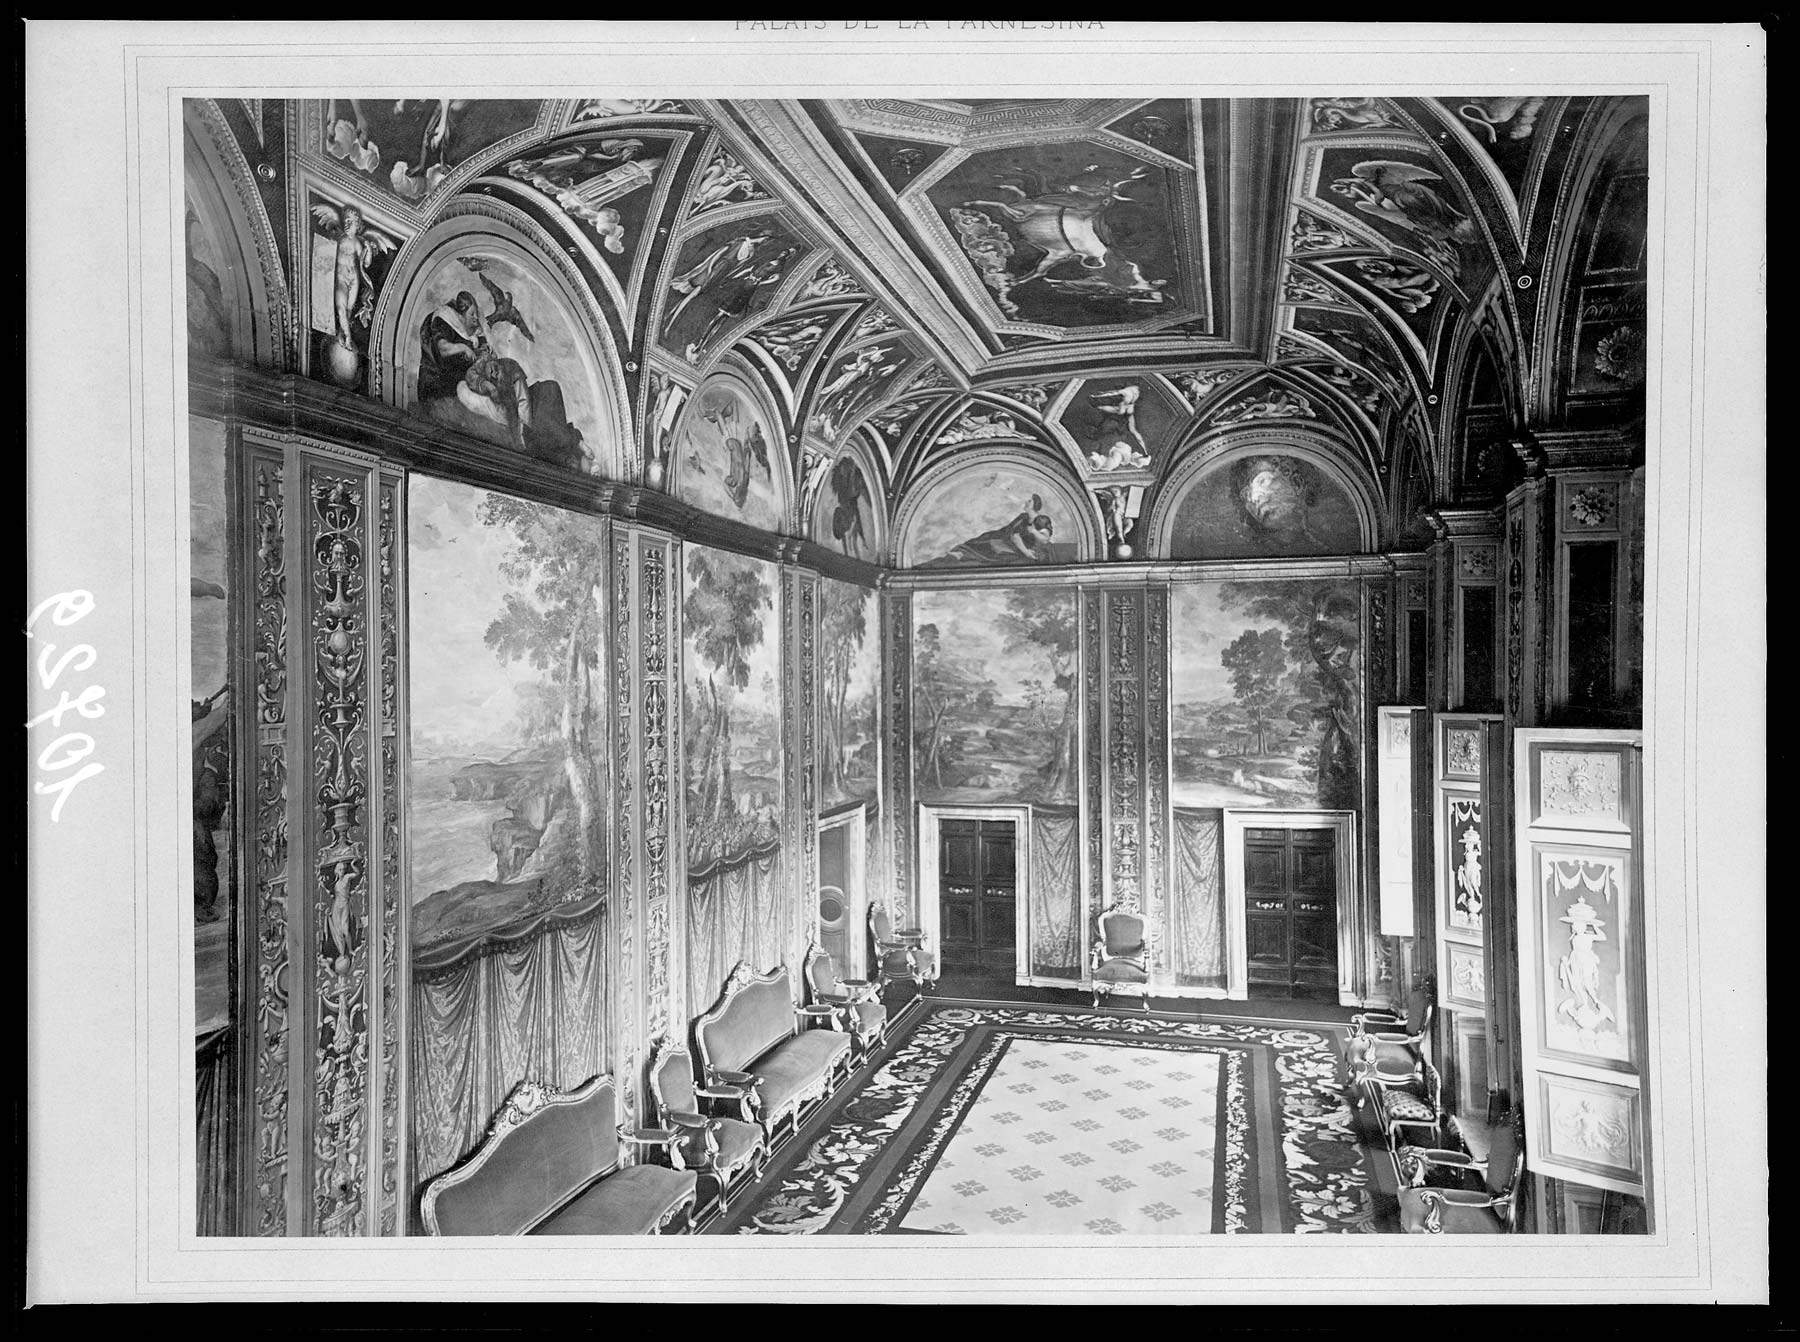 Villa Farnesina in the 19th century as seen by the Duke of Ripalda and Count Primoli. An exhibition in Rome 